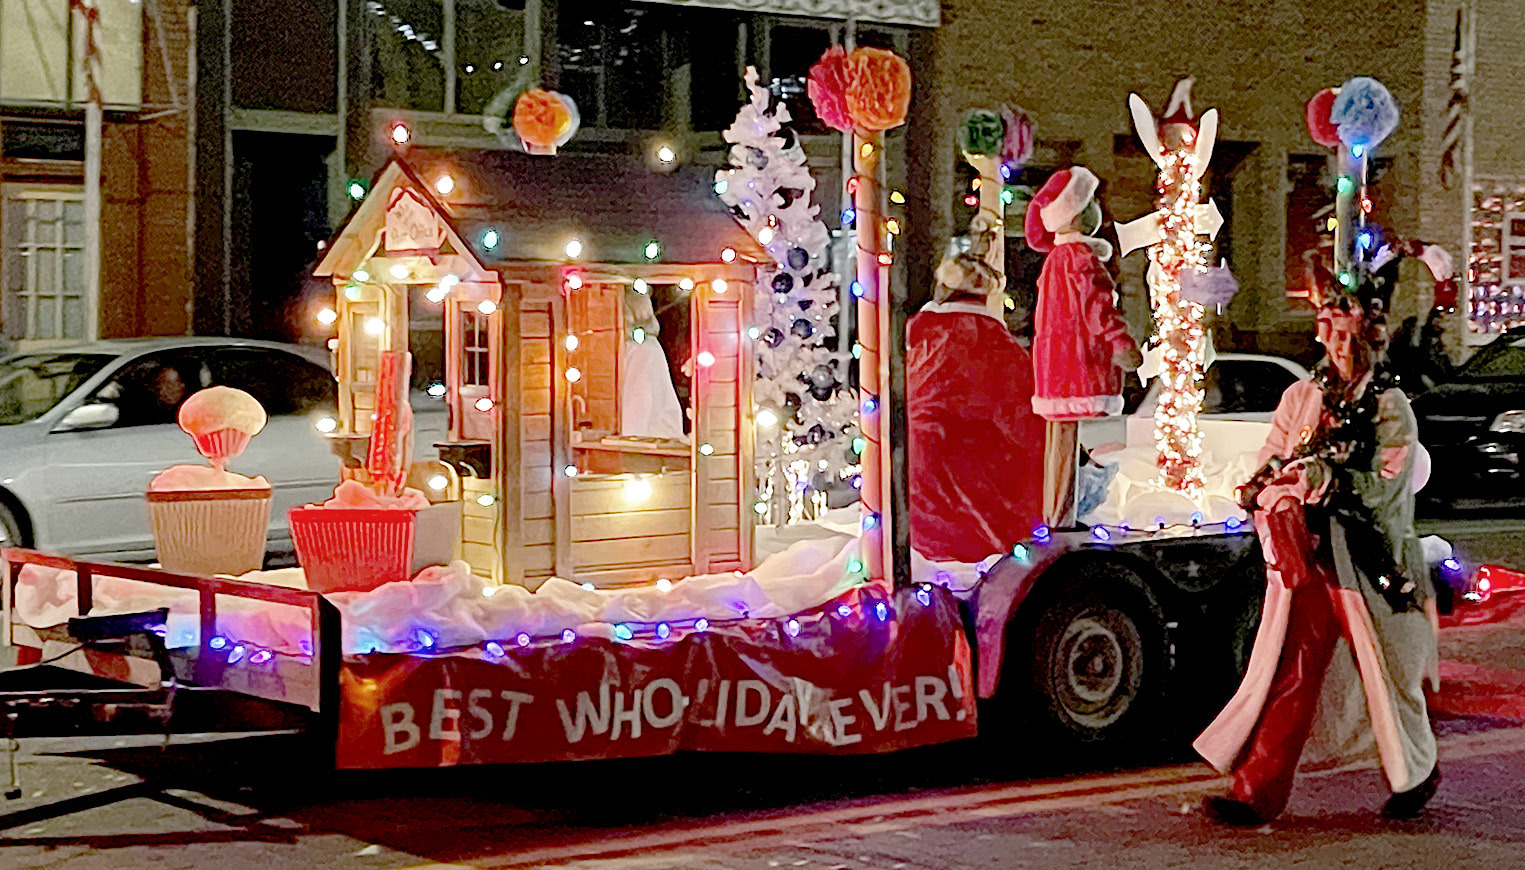 THE SIGMA PHI ESA’S Grinch float got first place in the Organization category at the Olde Tyme Christmas Parade held on Friday, November 25.